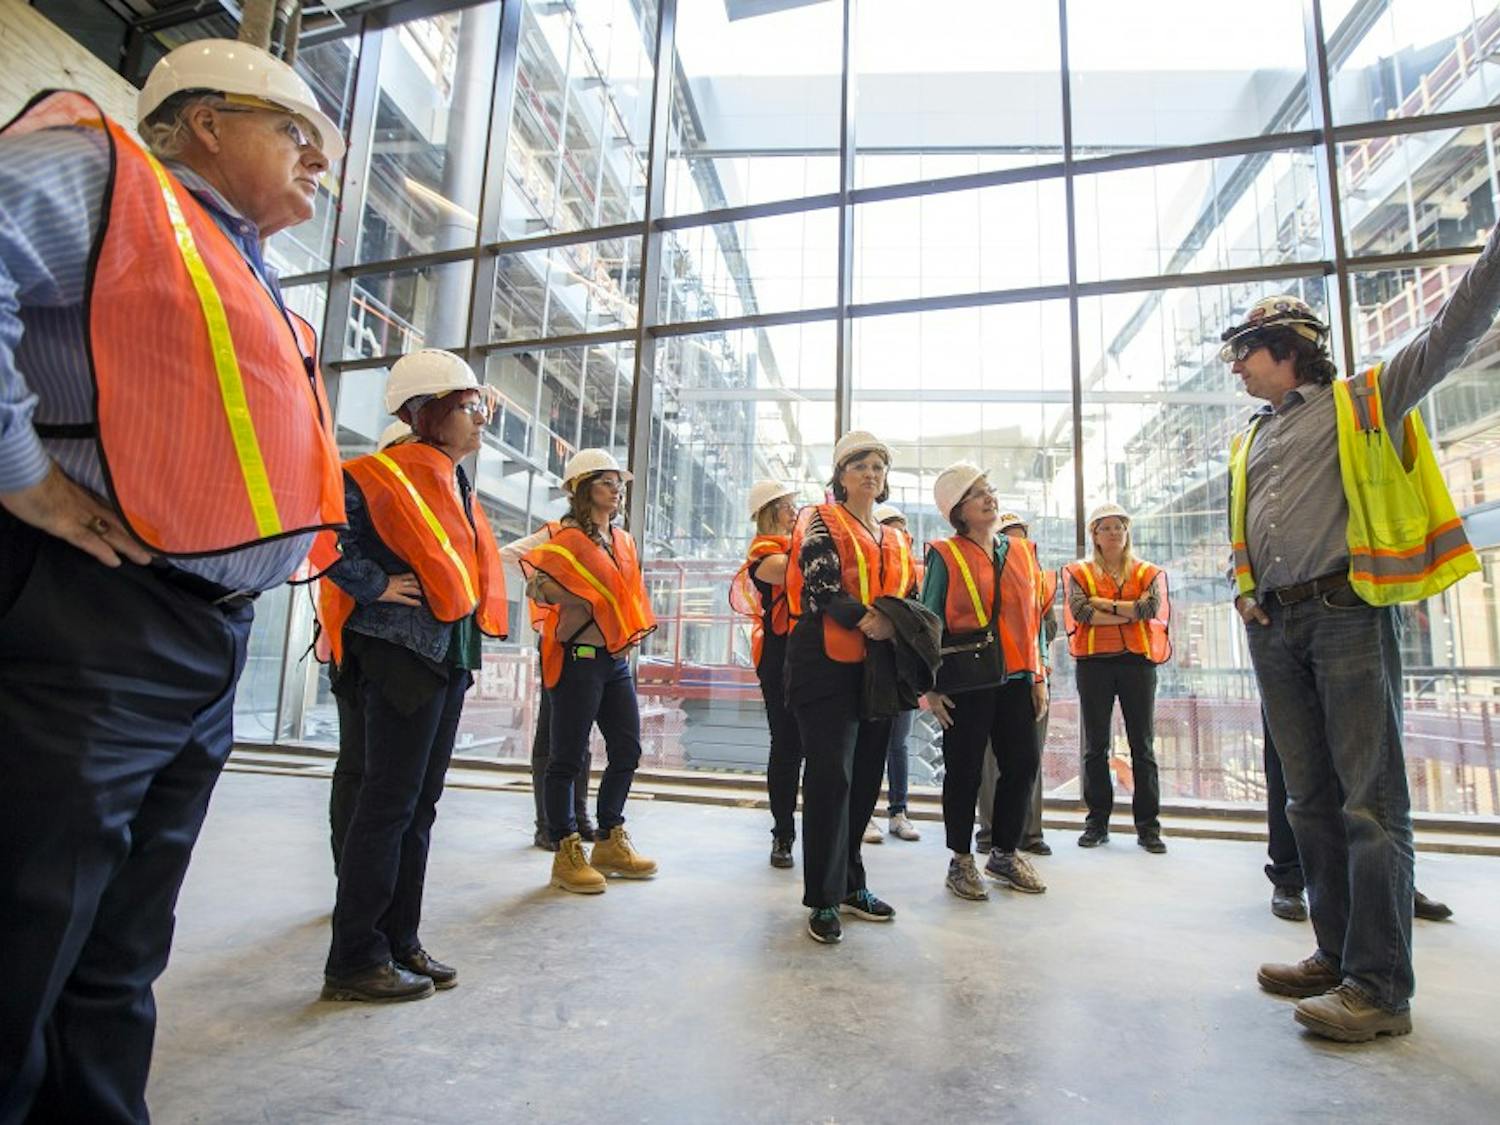 Project Manager Lew Laws, of DPR Construction, gives a tour of the Arizona Center for Law and Society to a group of faculty, alumni and reporters on the ASU Downtown Campus in Phoenix, Arizona, on Wednesday, March 23, 2016. The construction project is set to be finished and turned over to ASU in early June, Laws said. 